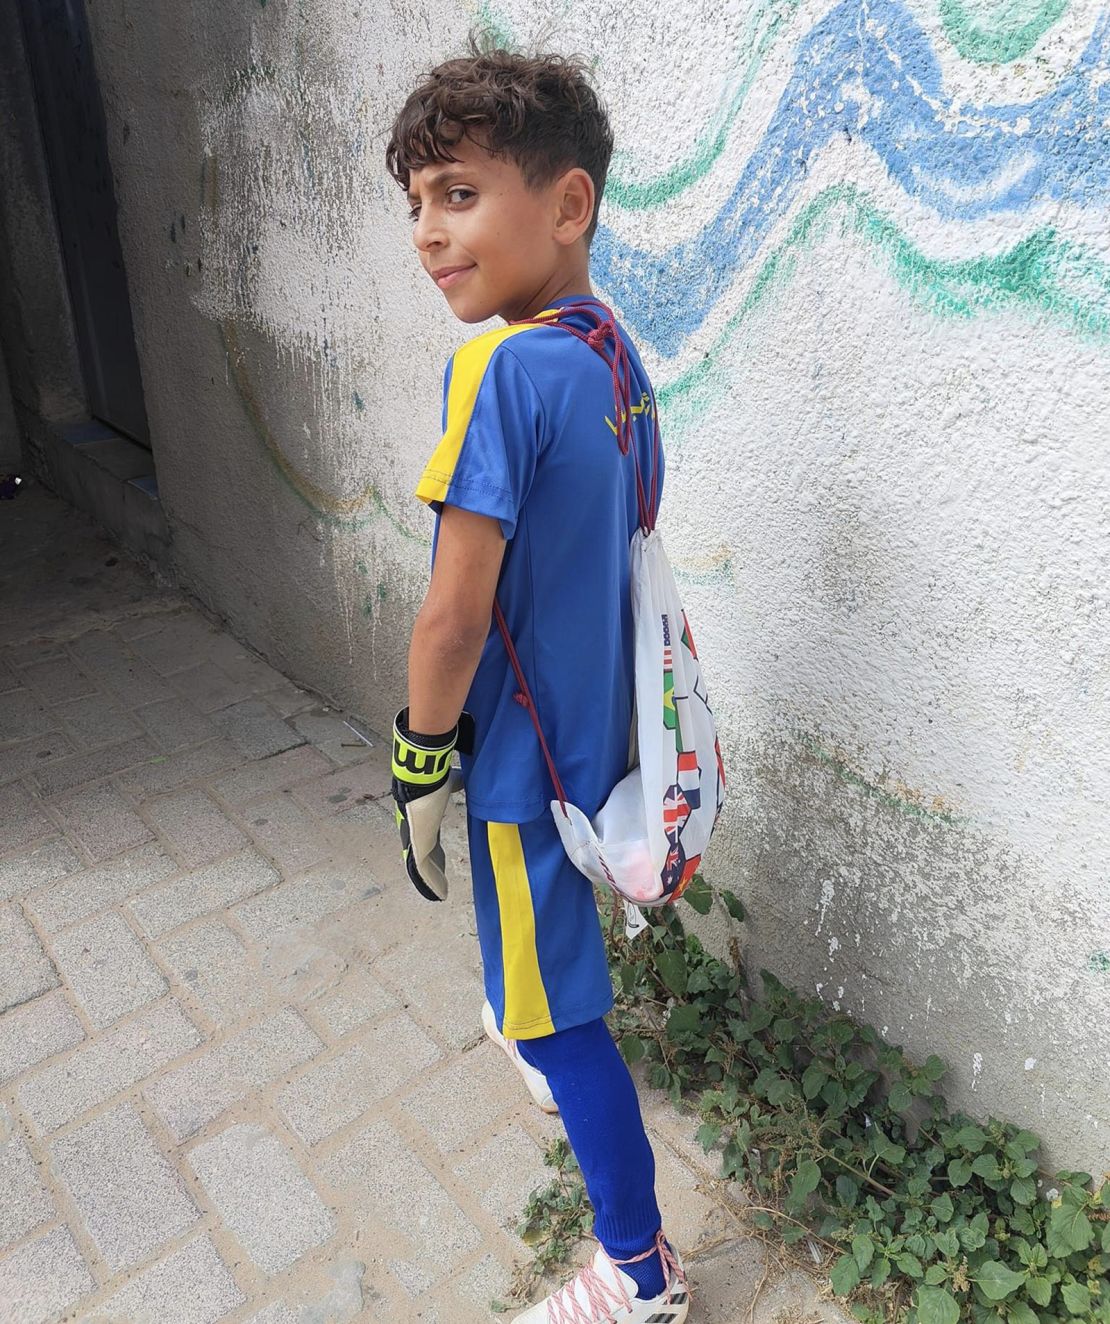 Hani Almadhoun's nine-year-old nephew Omar, who dreamed of being a soccer player.